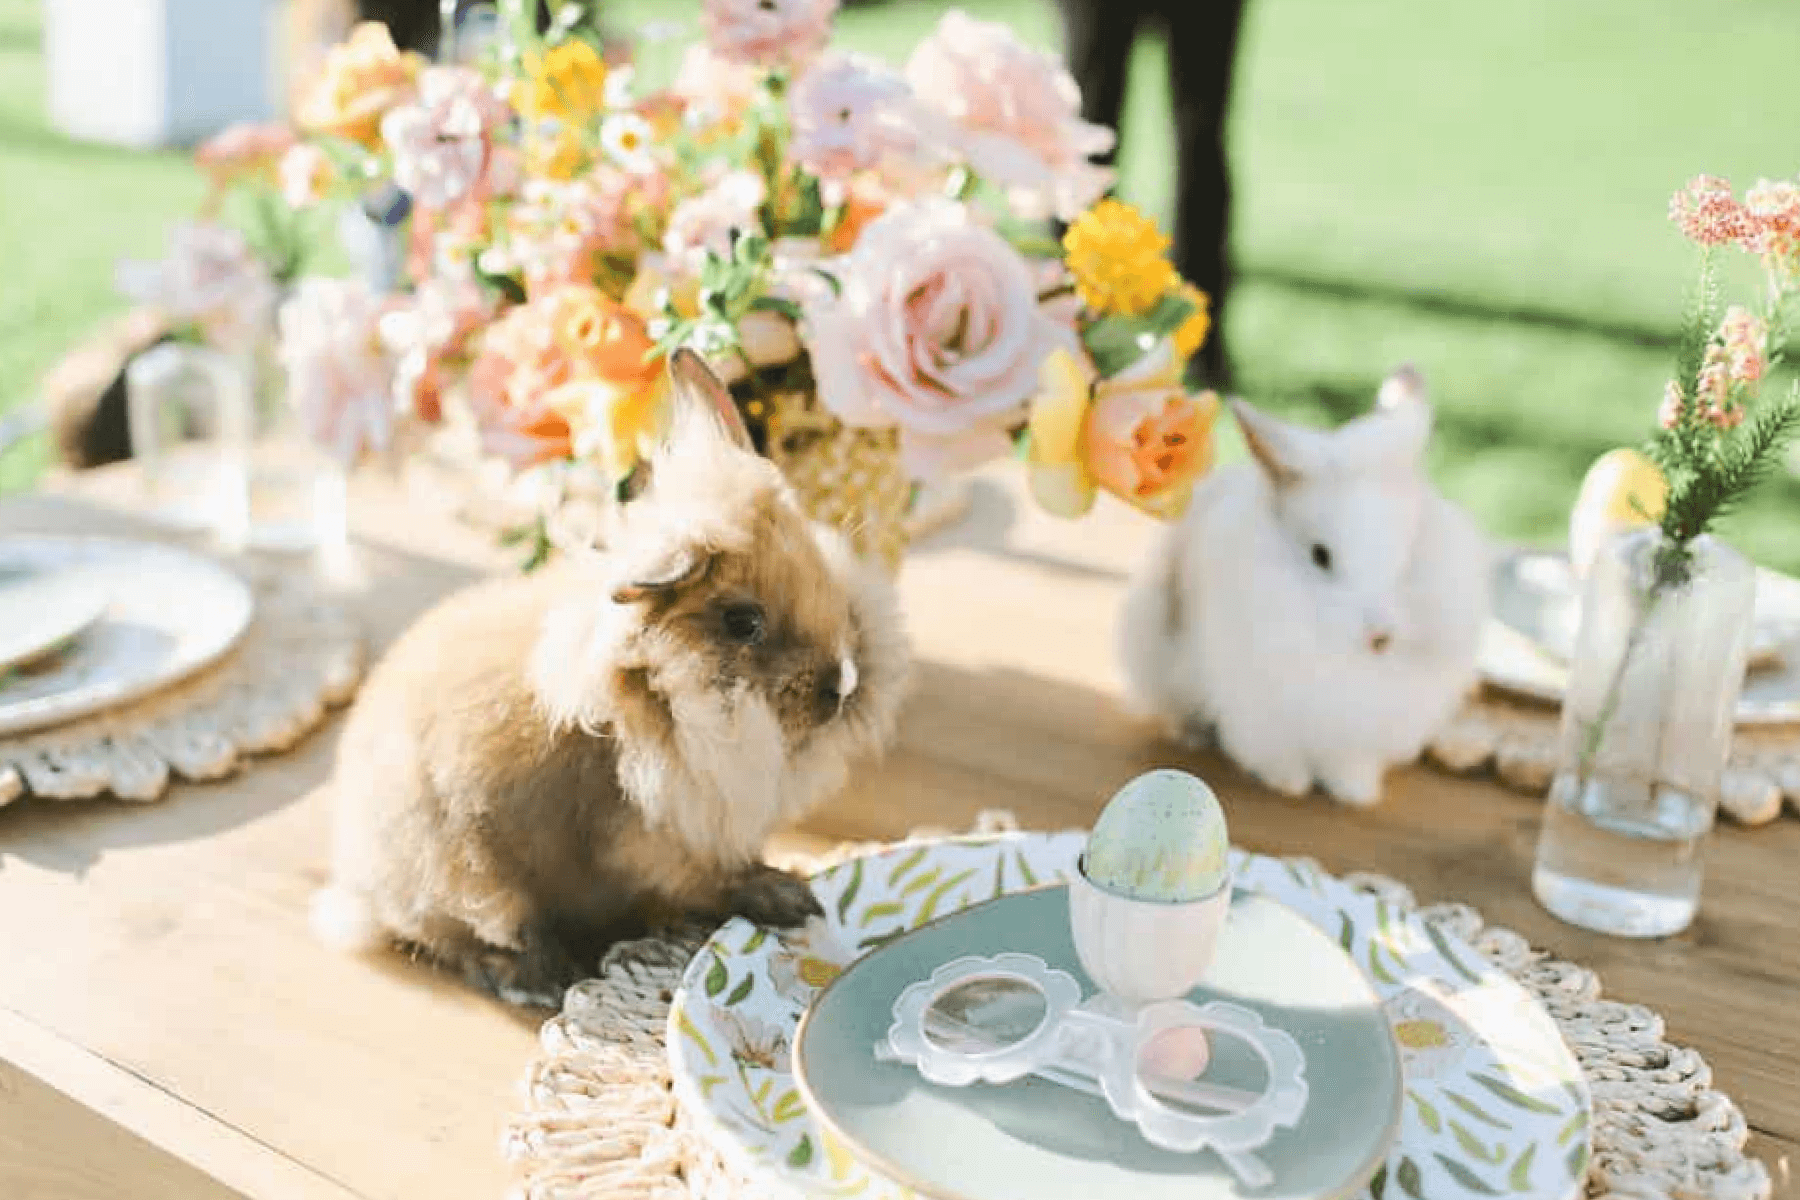 Two bunnies atop a pastel table setting with flowers, eggs, and sunglasses.